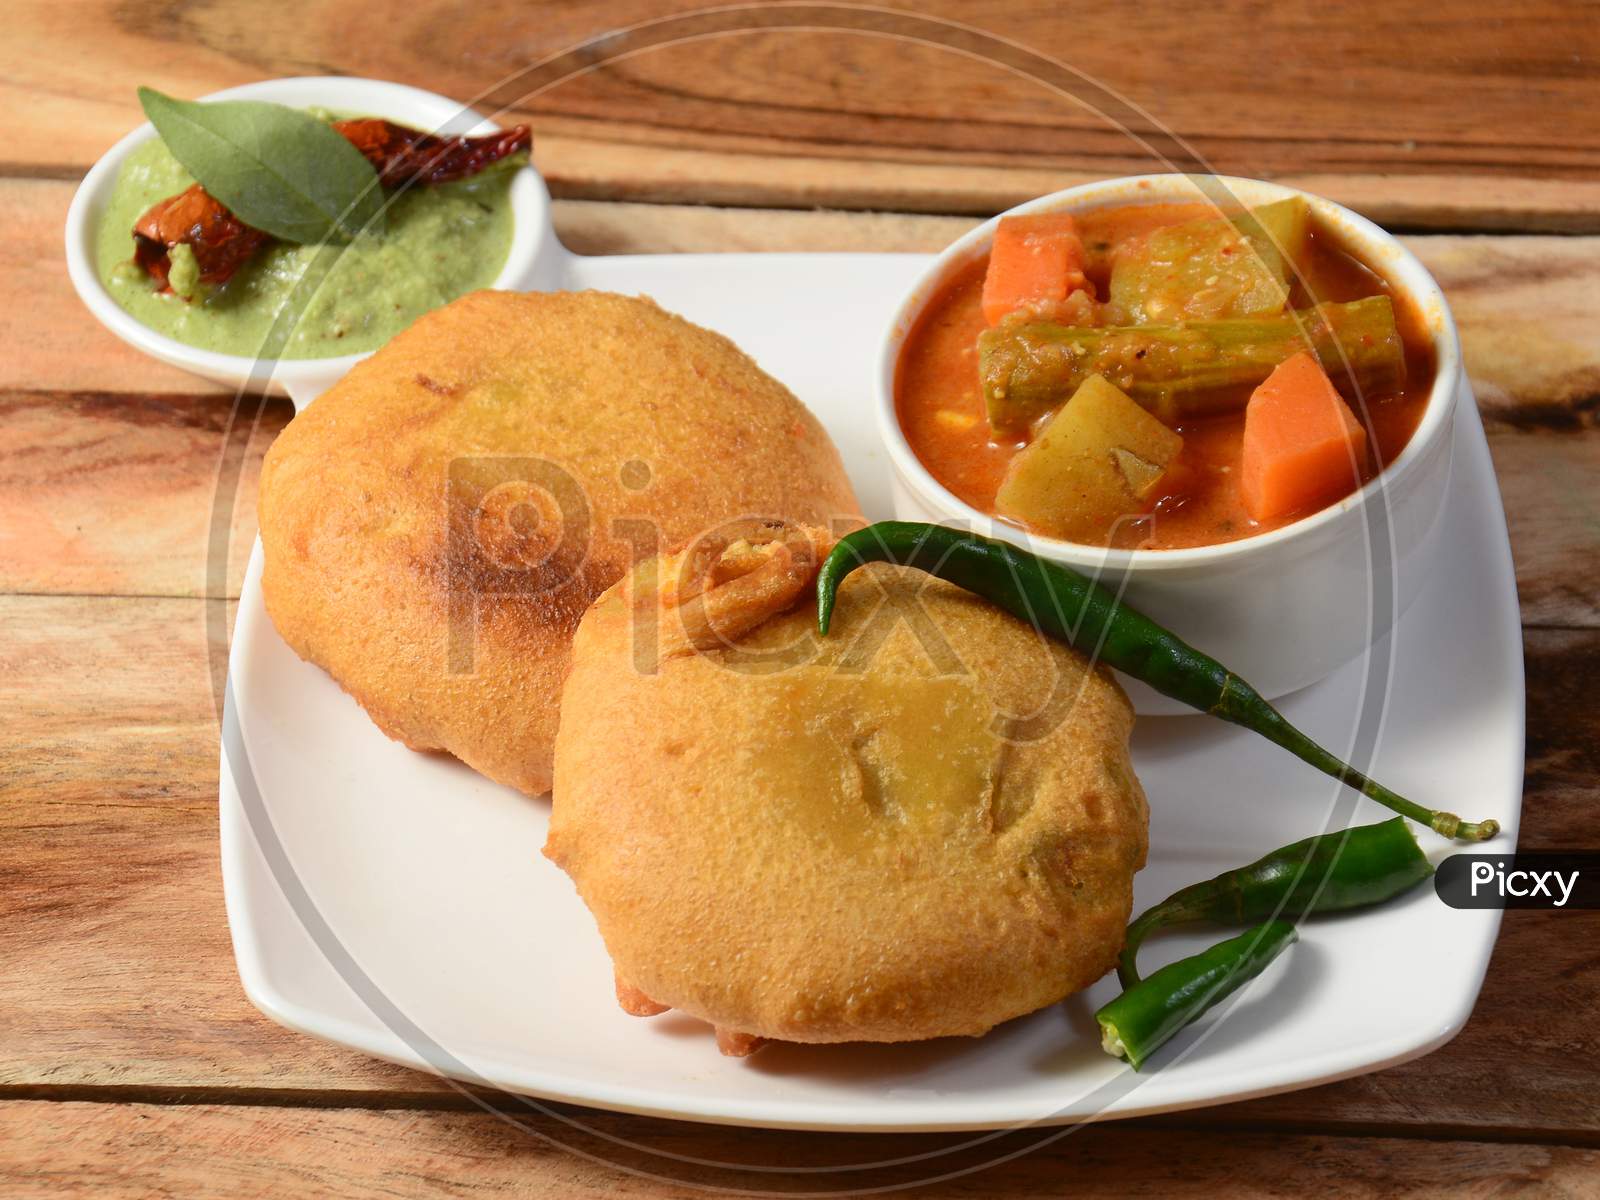 Batata Vada Or Potato Fritter Is A Popular Snack In Maharashtra,India. Mashed Potato Patty Coated With Chick Pea Flour, Which Is Then Deep Fried And Served Hot With Chutney And Sambar, Selective Focus